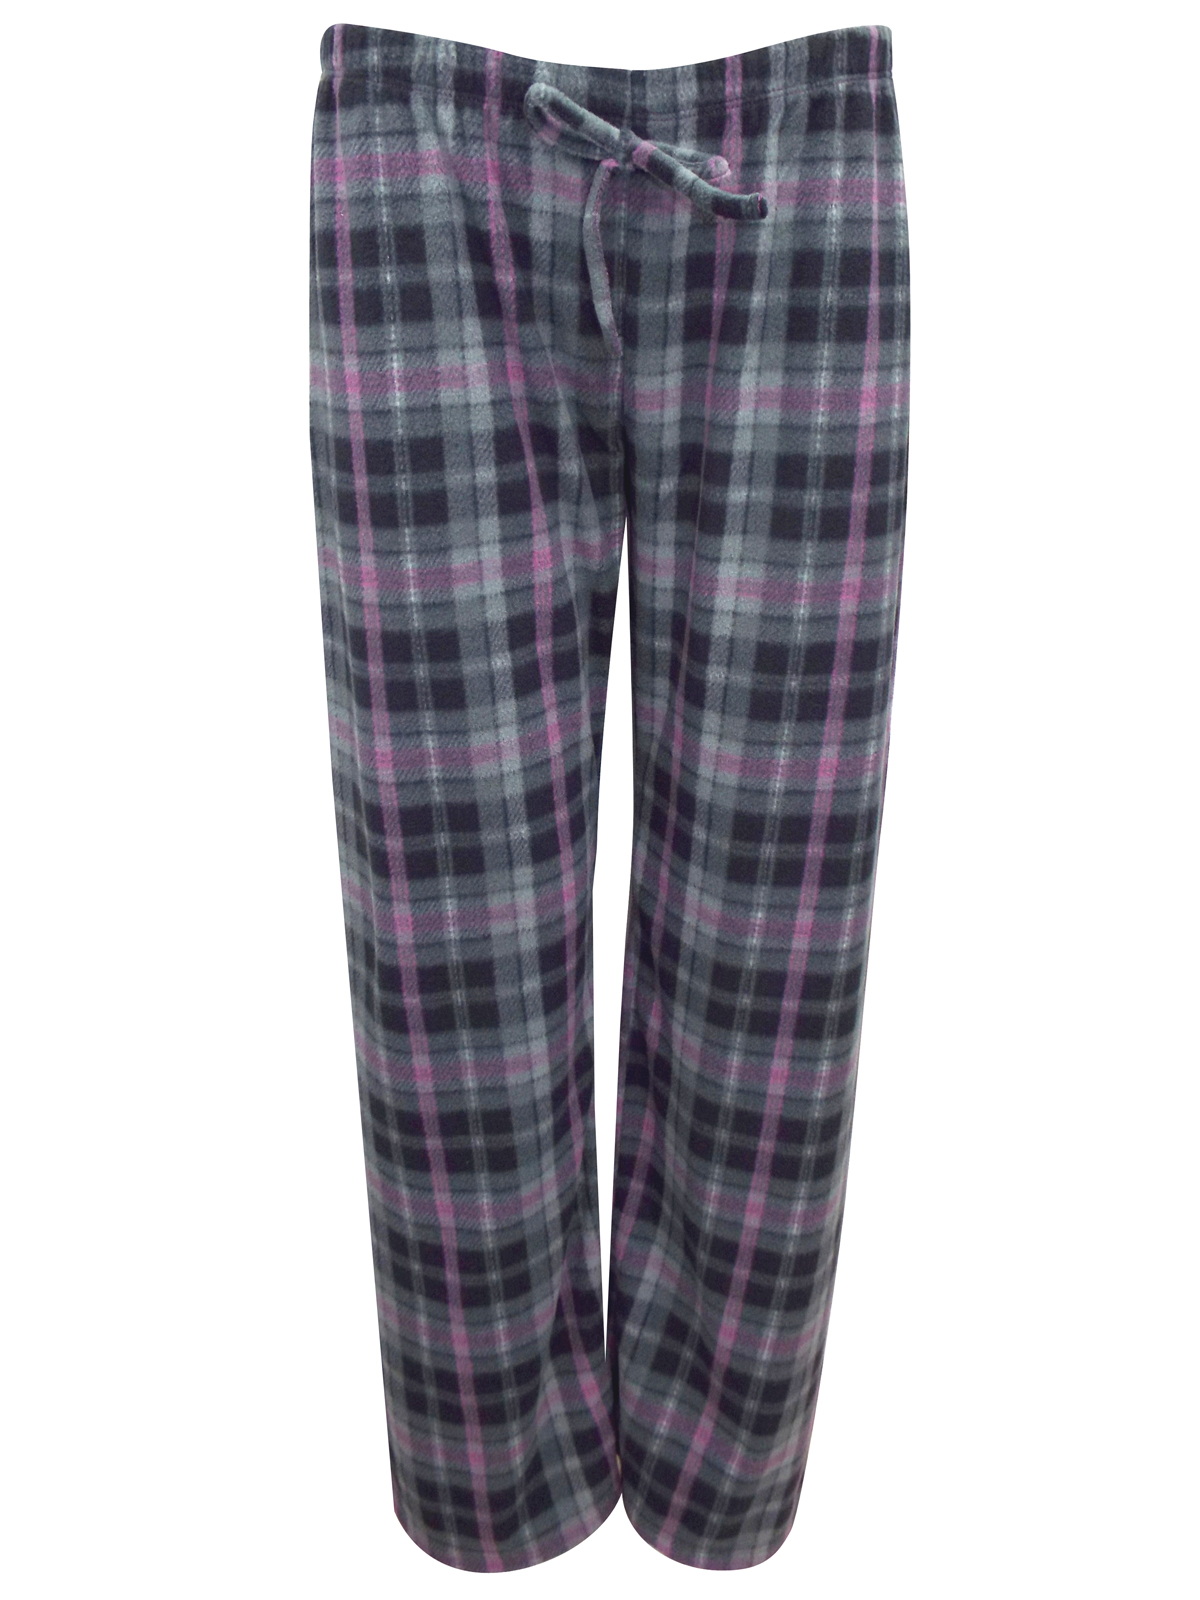 Marks and Spencer - - M&5 GREY Supersoft Checked Fleece Pyjamas - Size ...